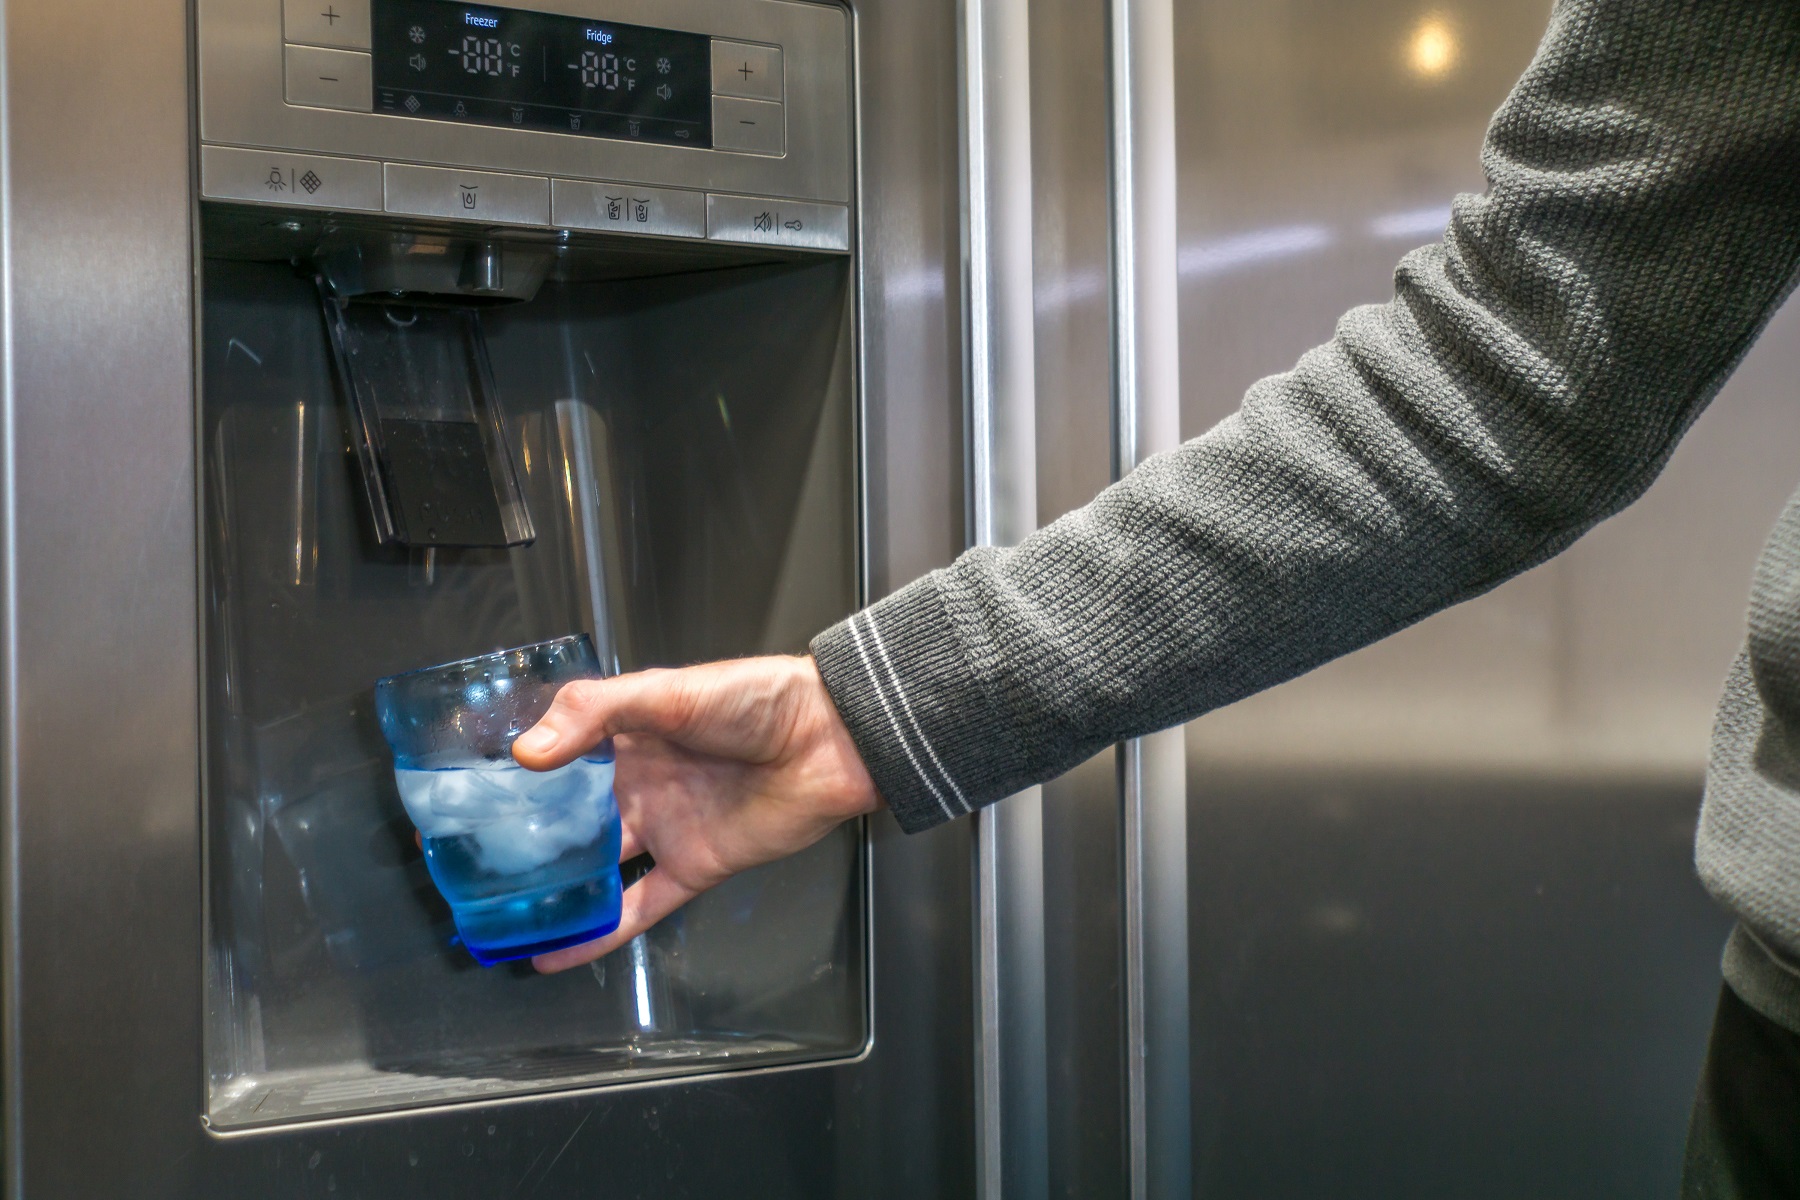 Male hand is pouring water and ice cubes from dispenser of fridge